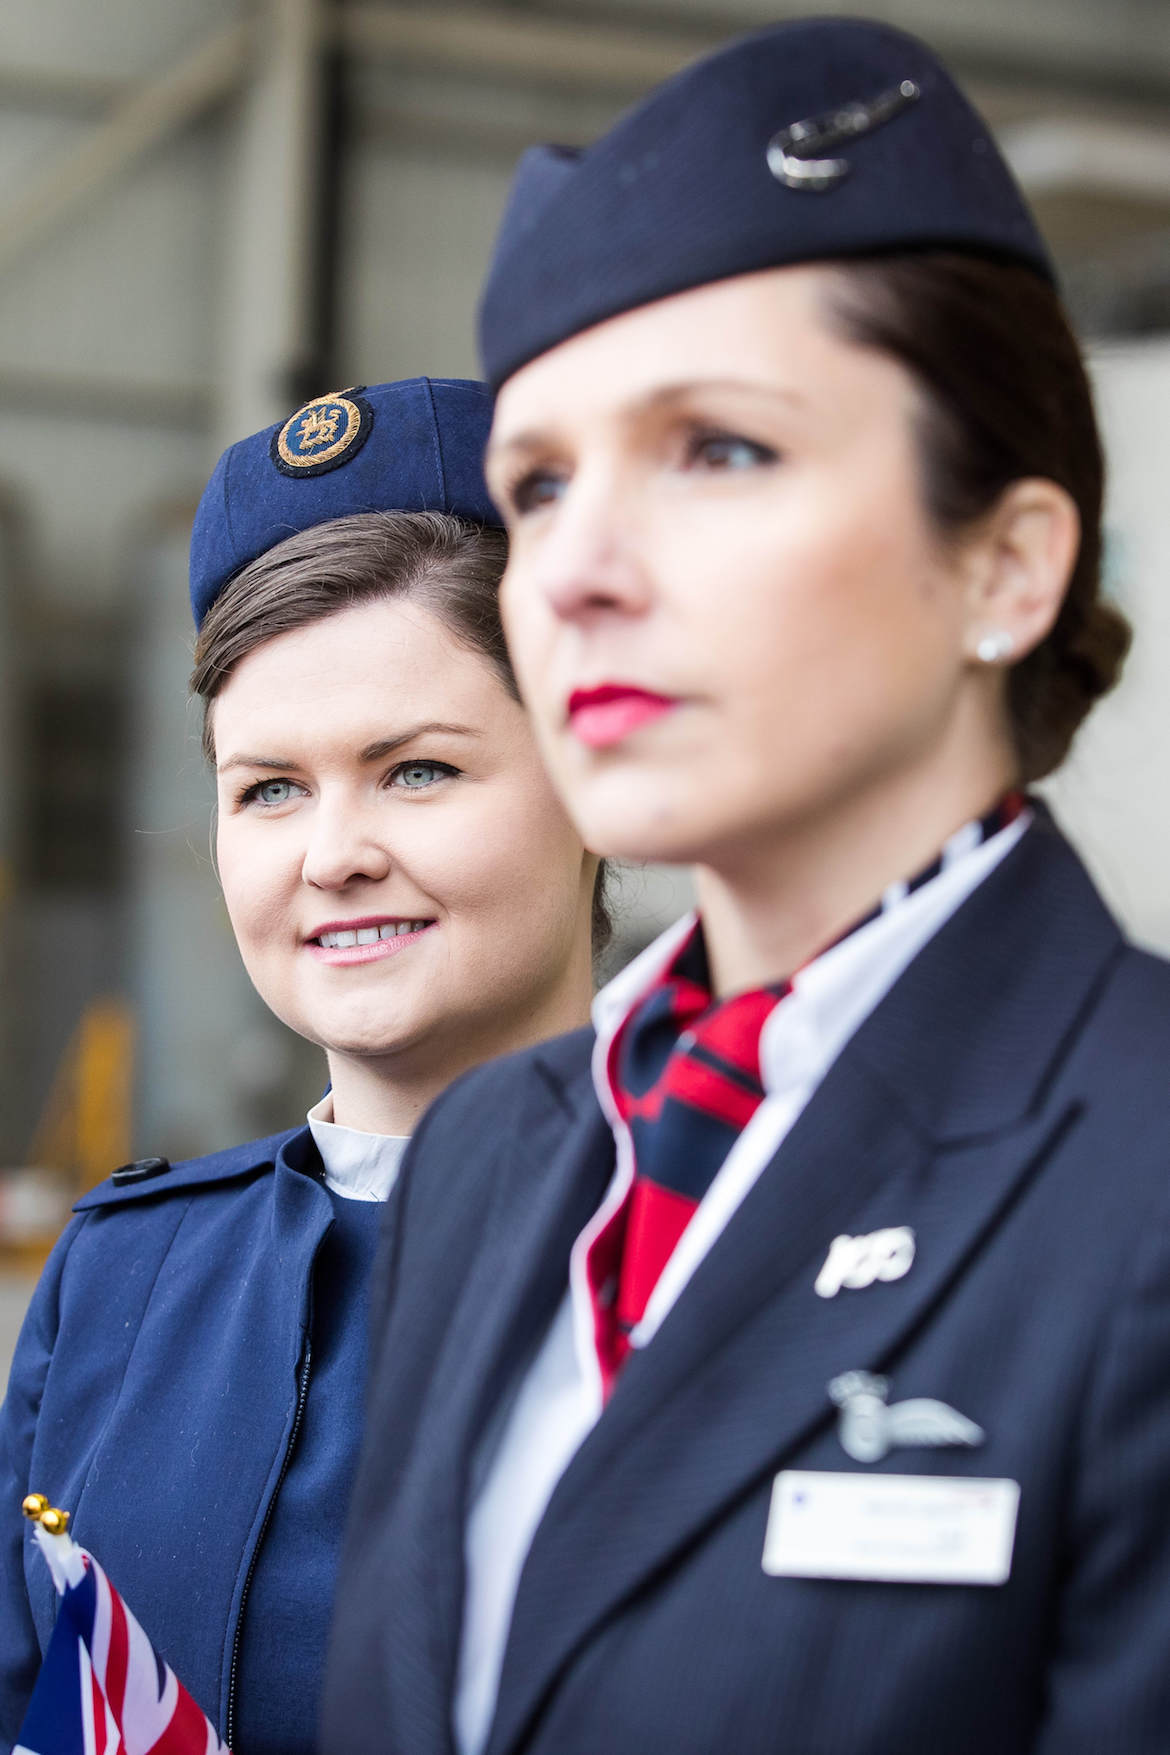 British Airways staff in current and previous uniform wait for the arrival of the 747-400 in BOAC livery. (British Airways)